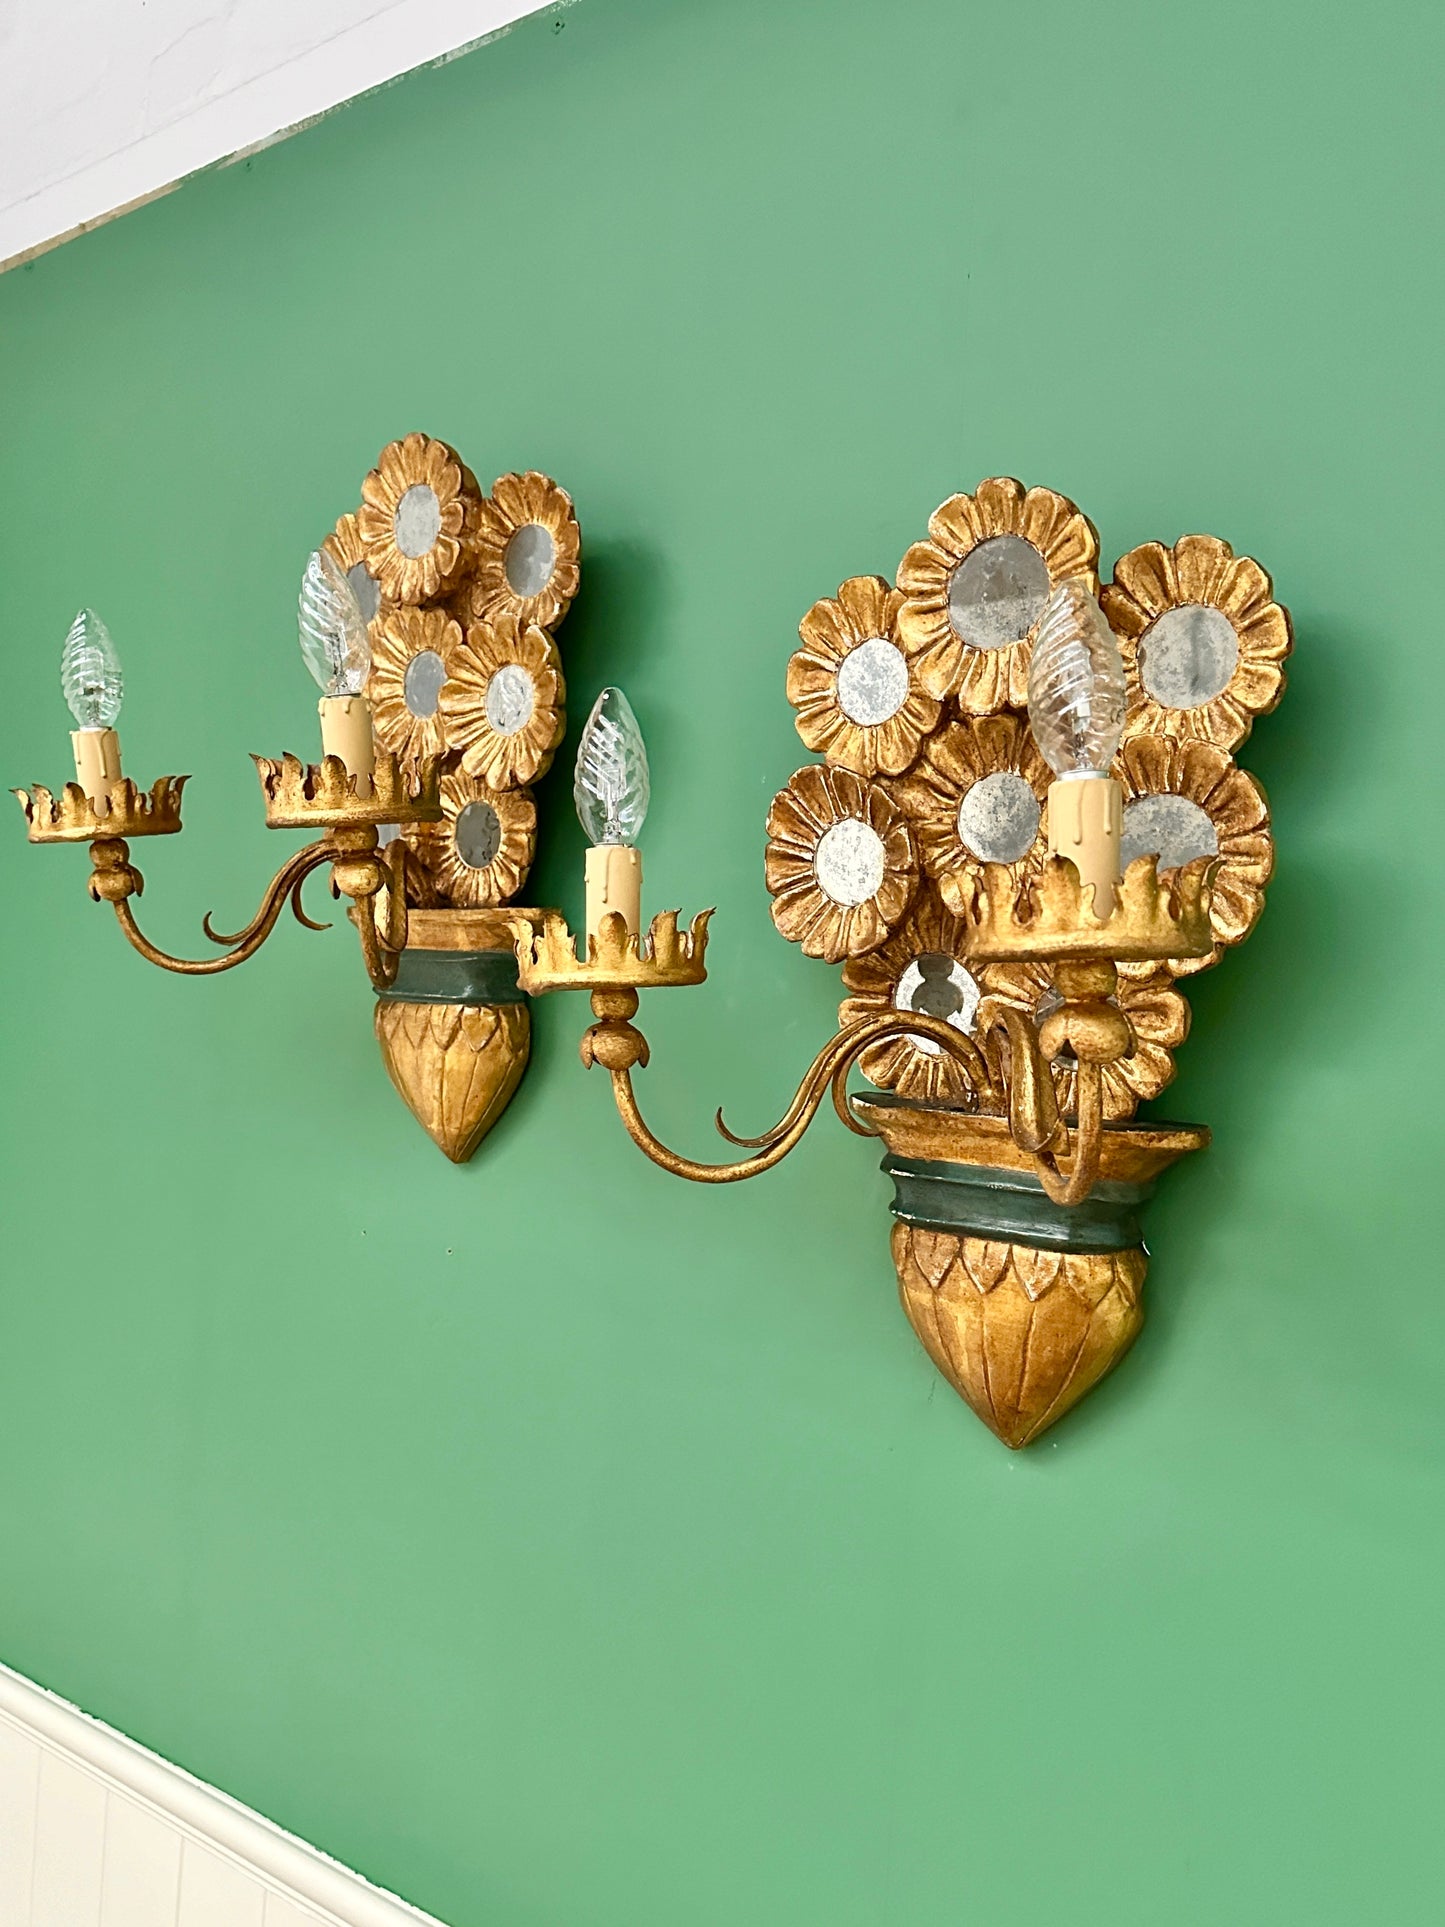 Pair Of Early C20th Italian Giltwood Wall Lights (1 of 2 pairs available)